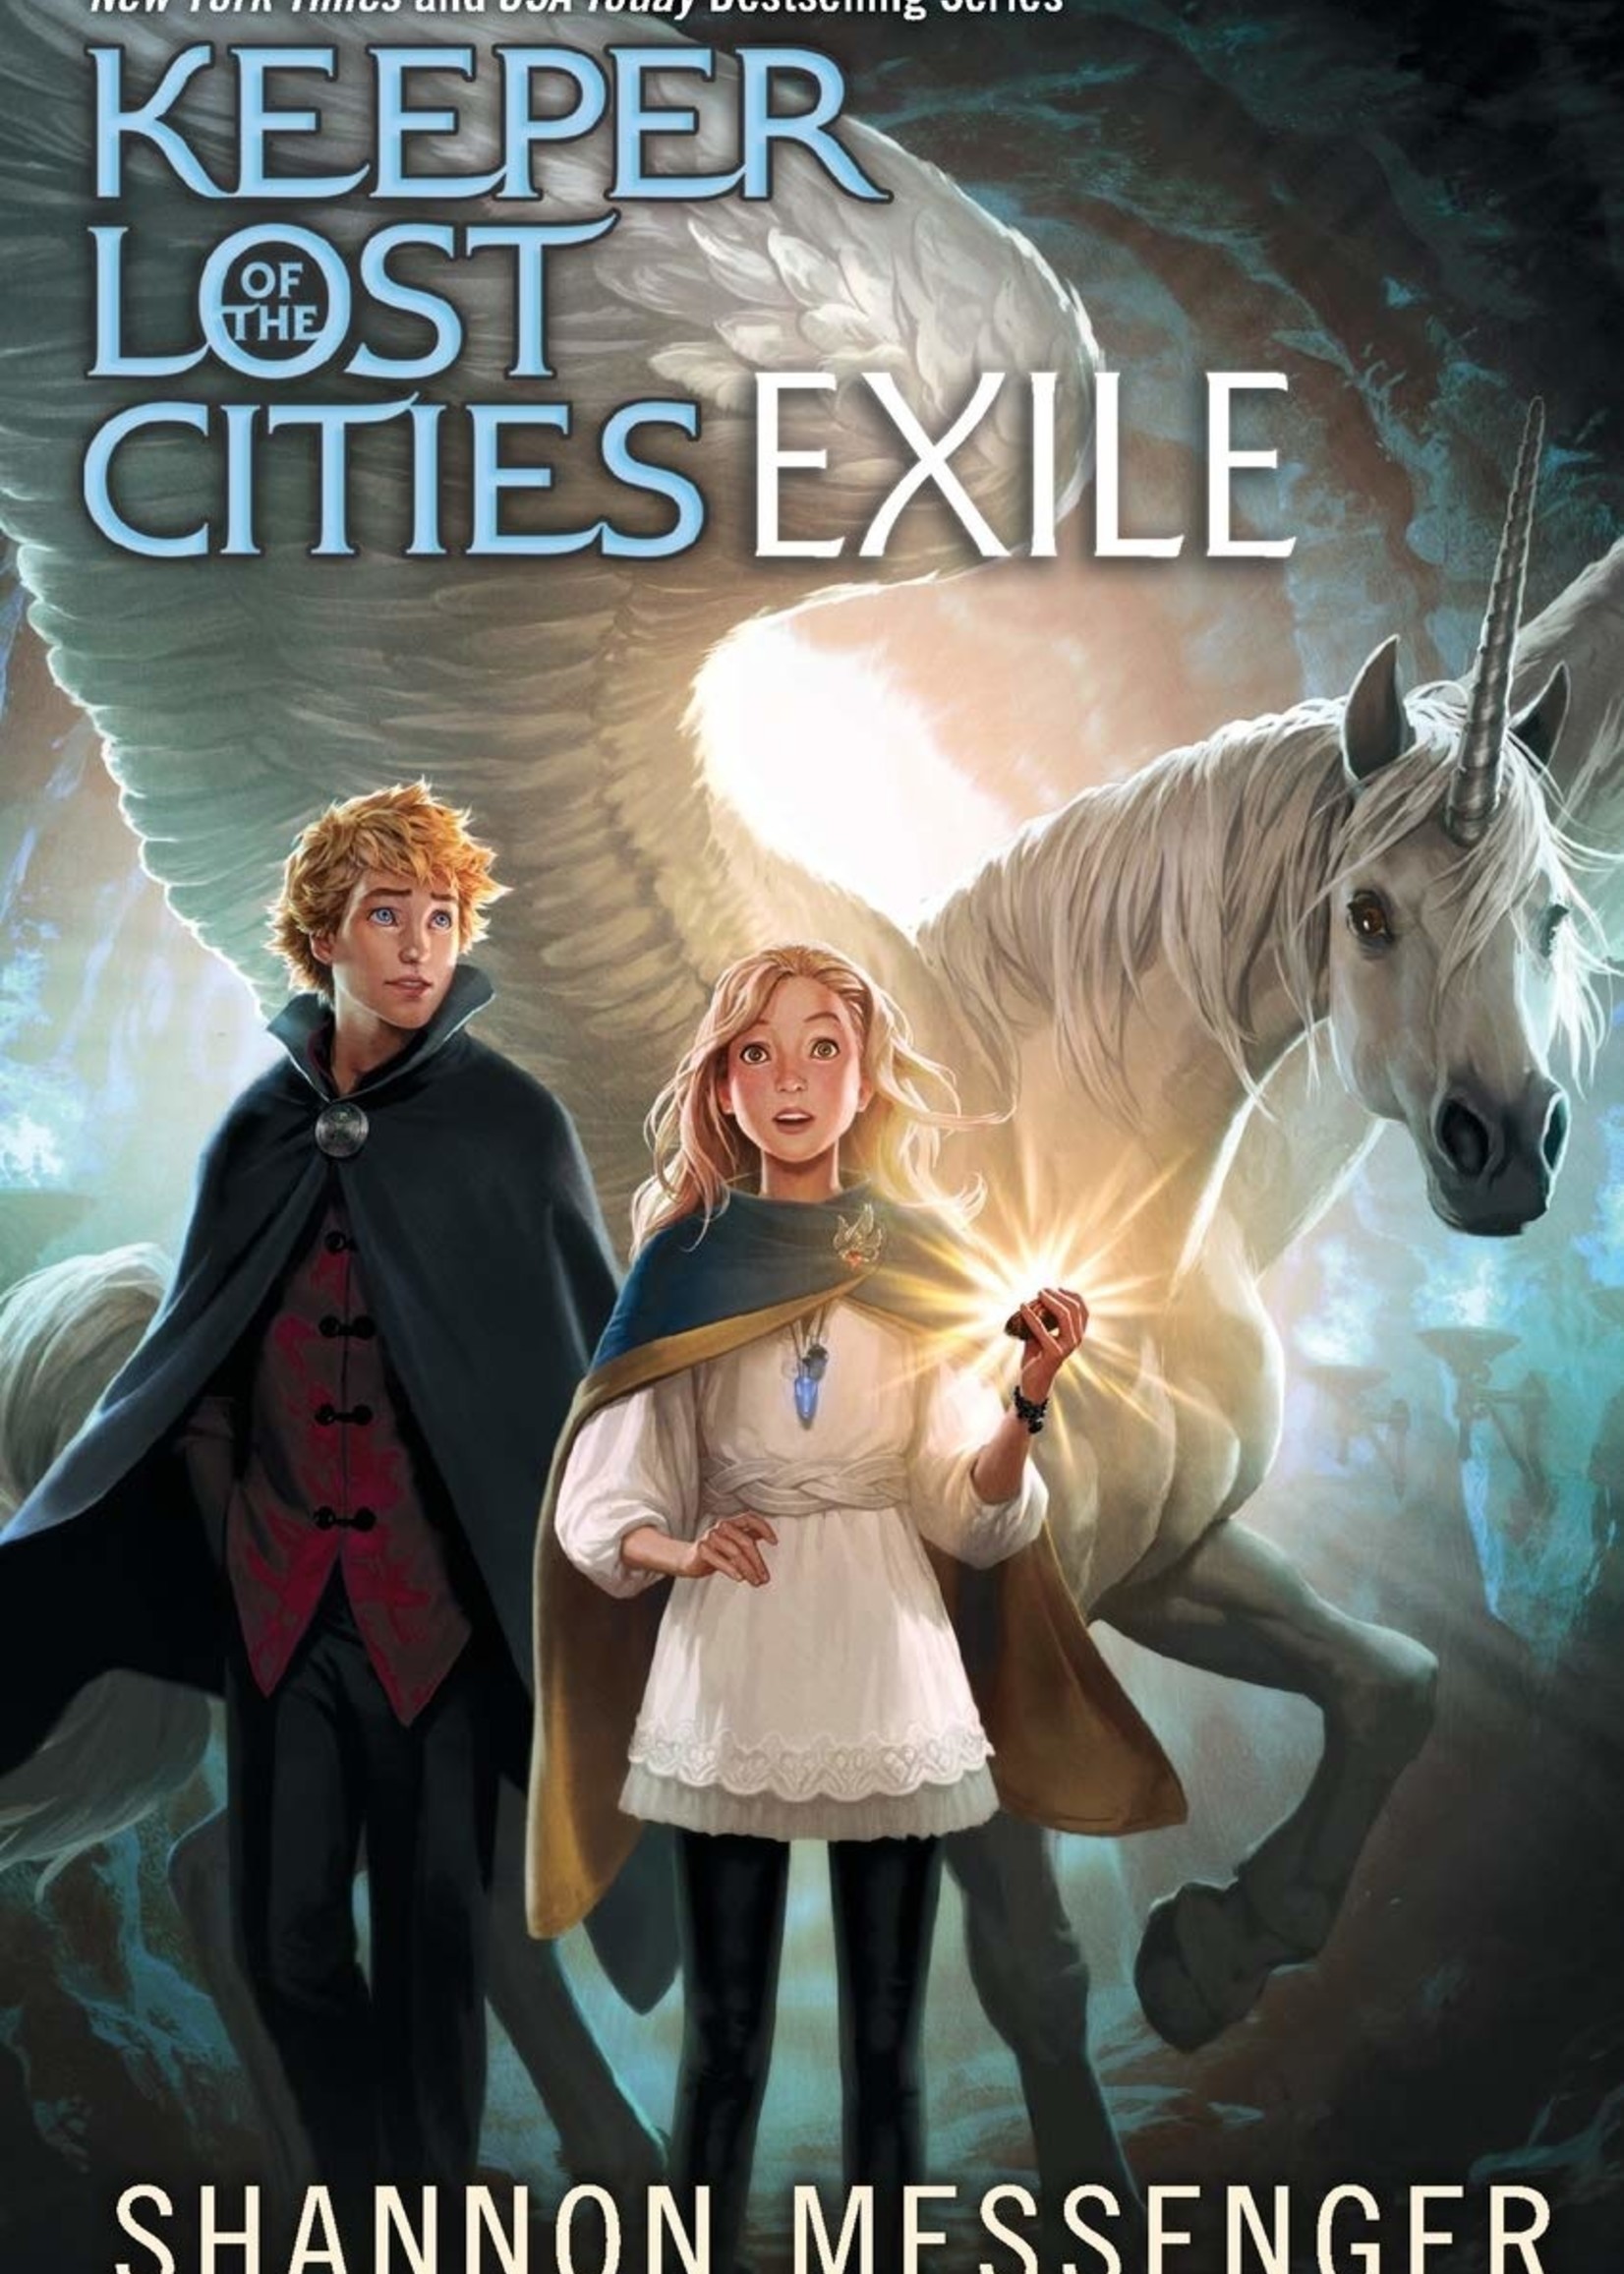 Keeper of the Lost Cities #02, Exile - Paperback